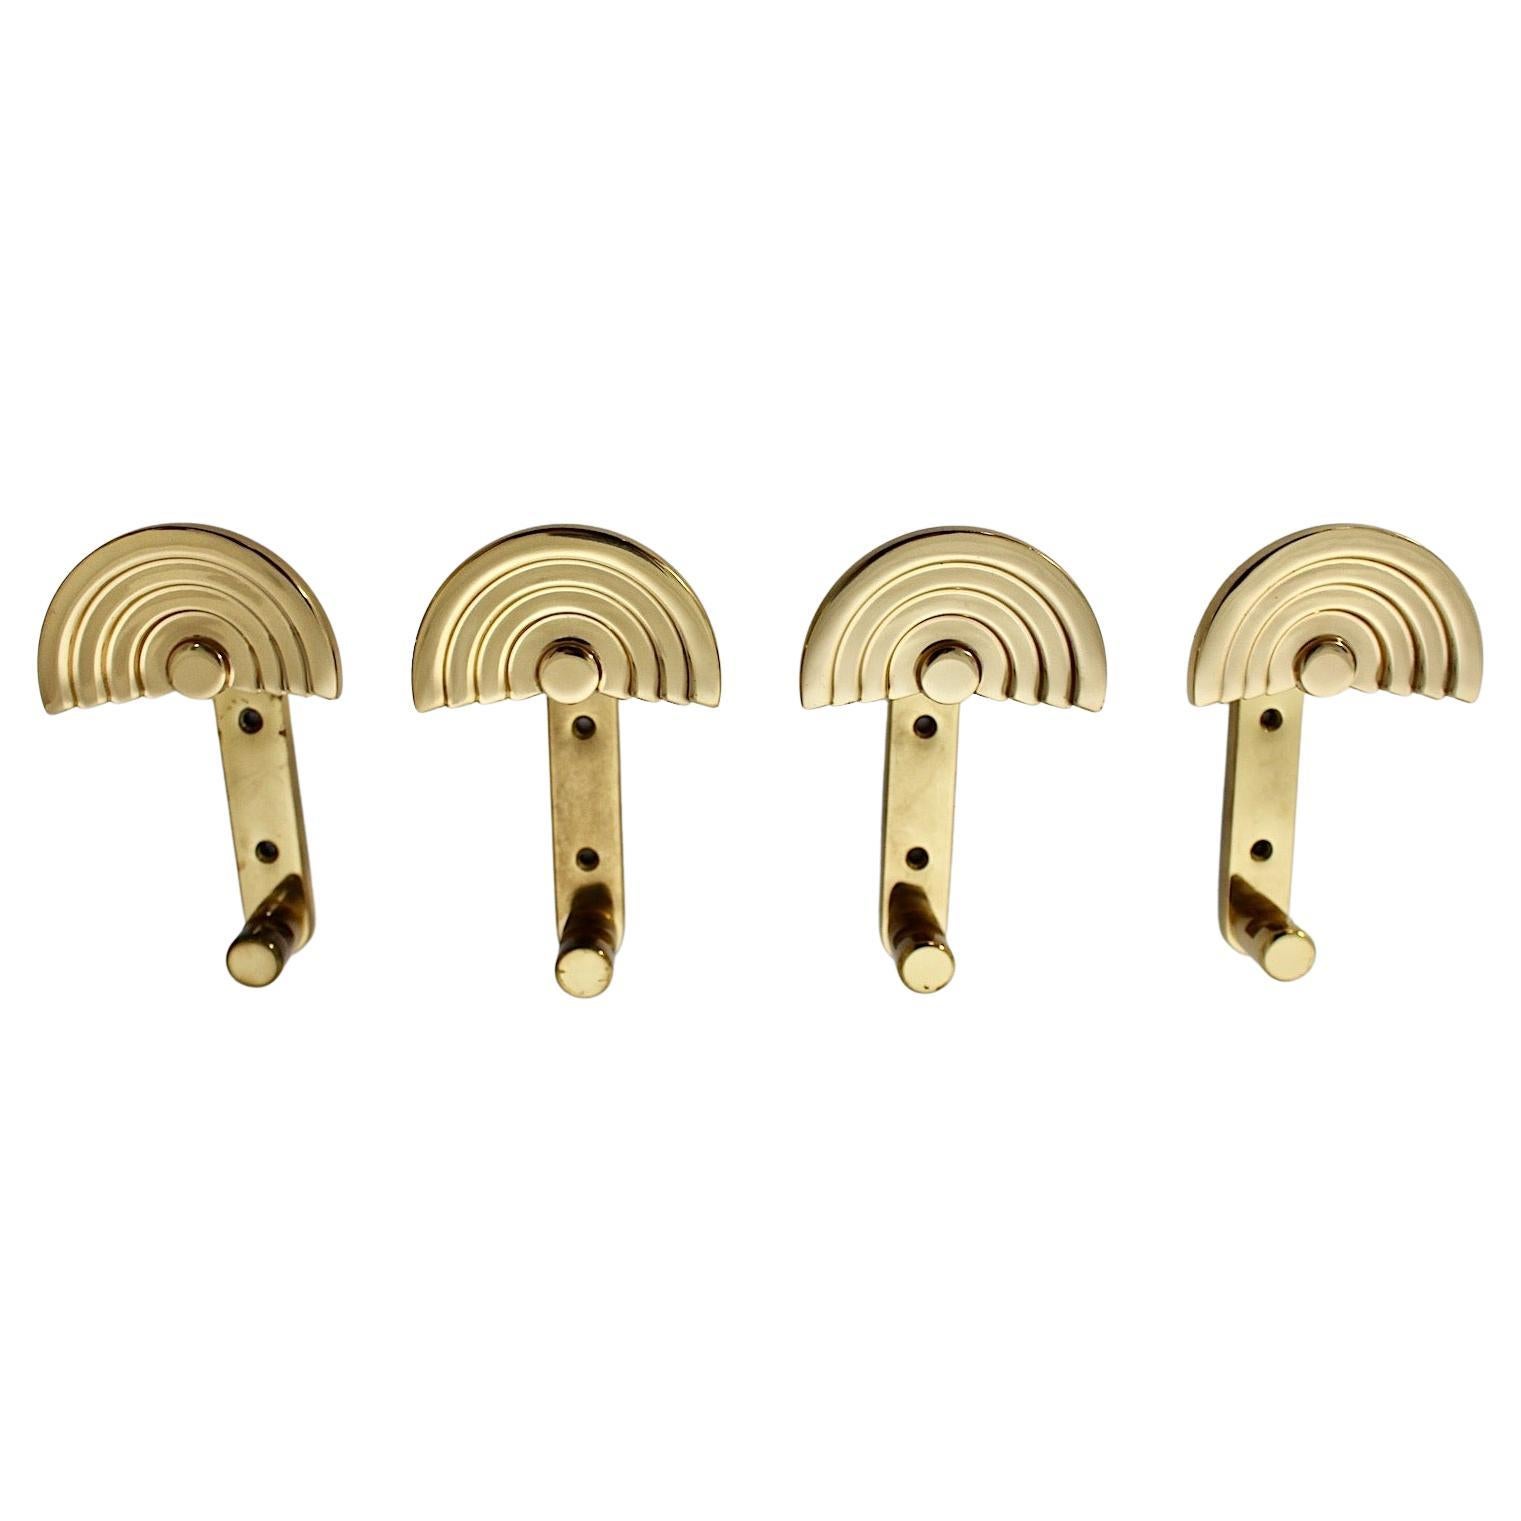 Ettore Sottsass Vintage Brass Four Wall Hooks or Coat Hooks circa 1985 Italy